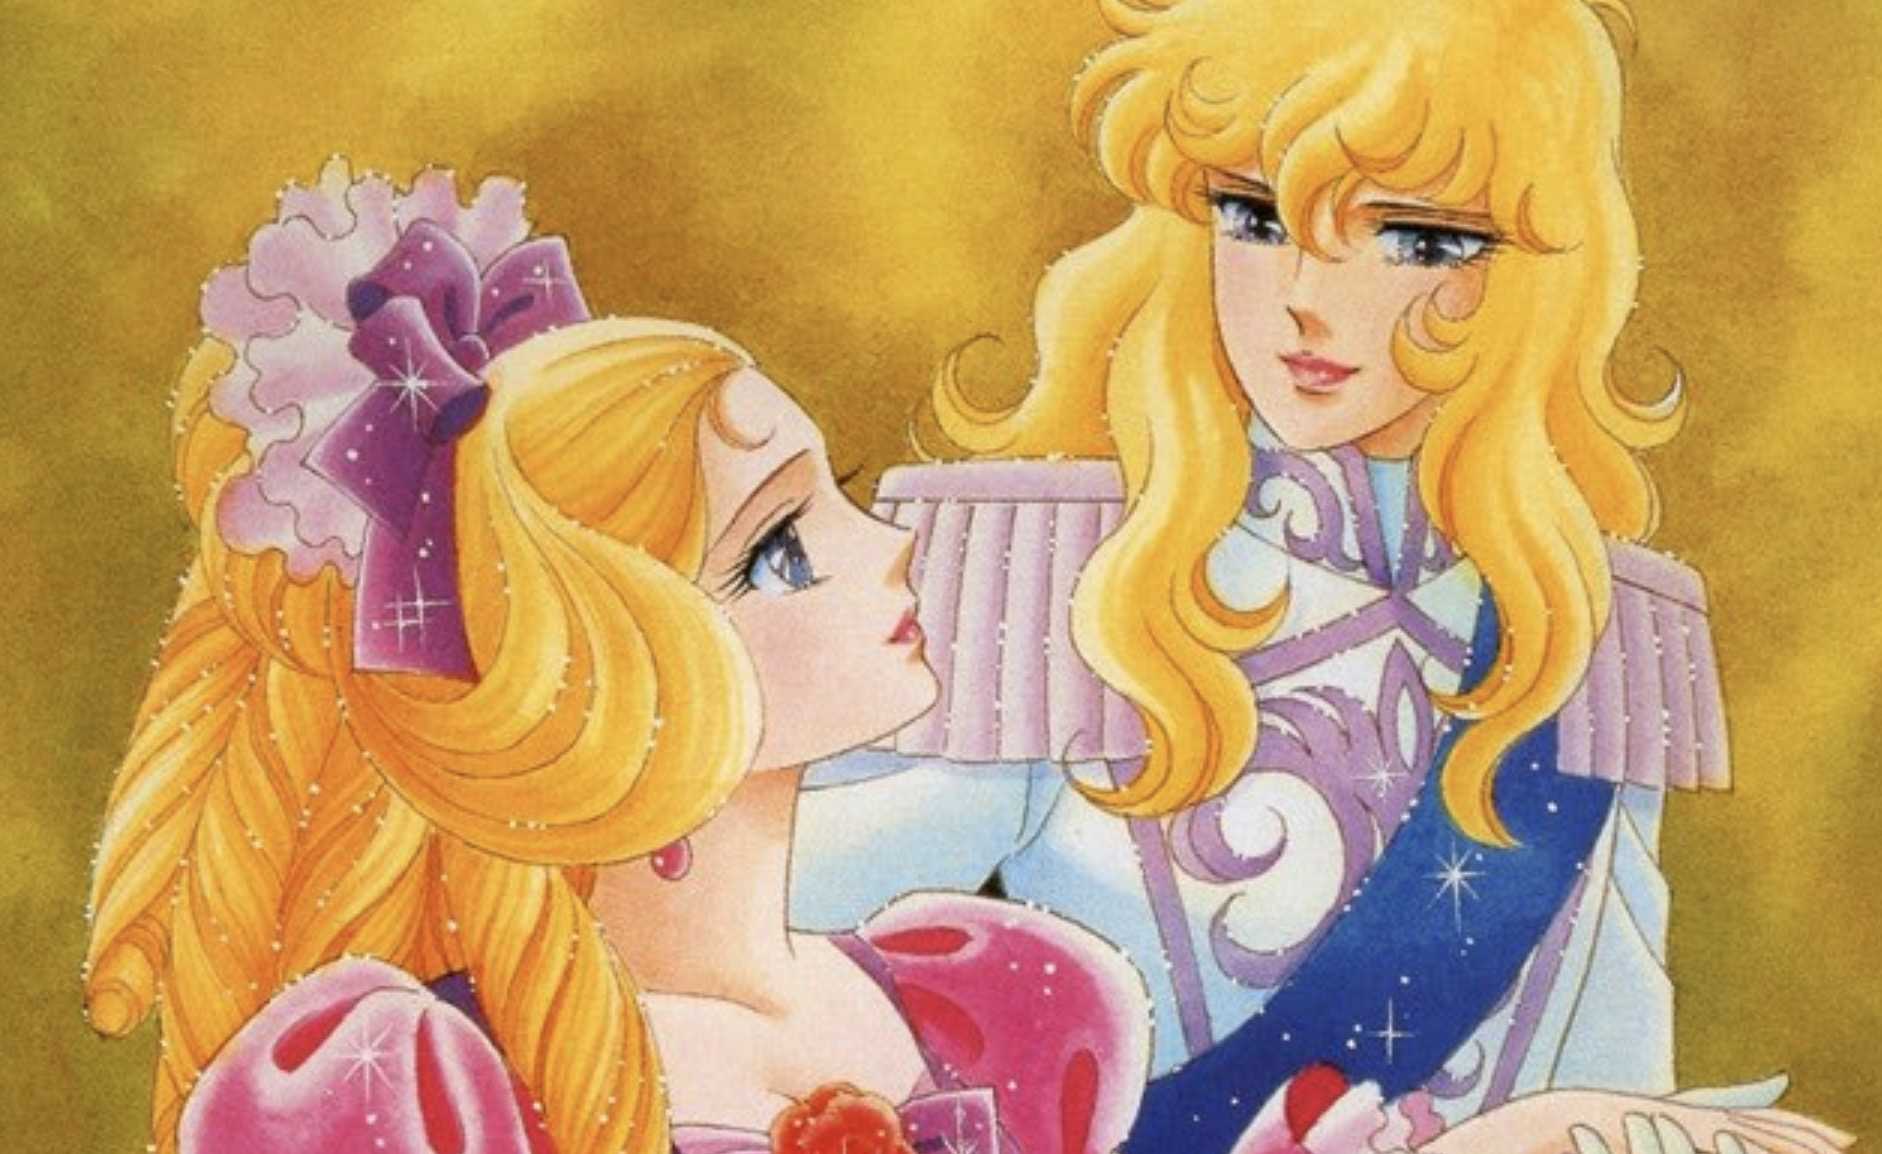 Marie Antoinette and Lady Oscar, from The Rose of Versailles